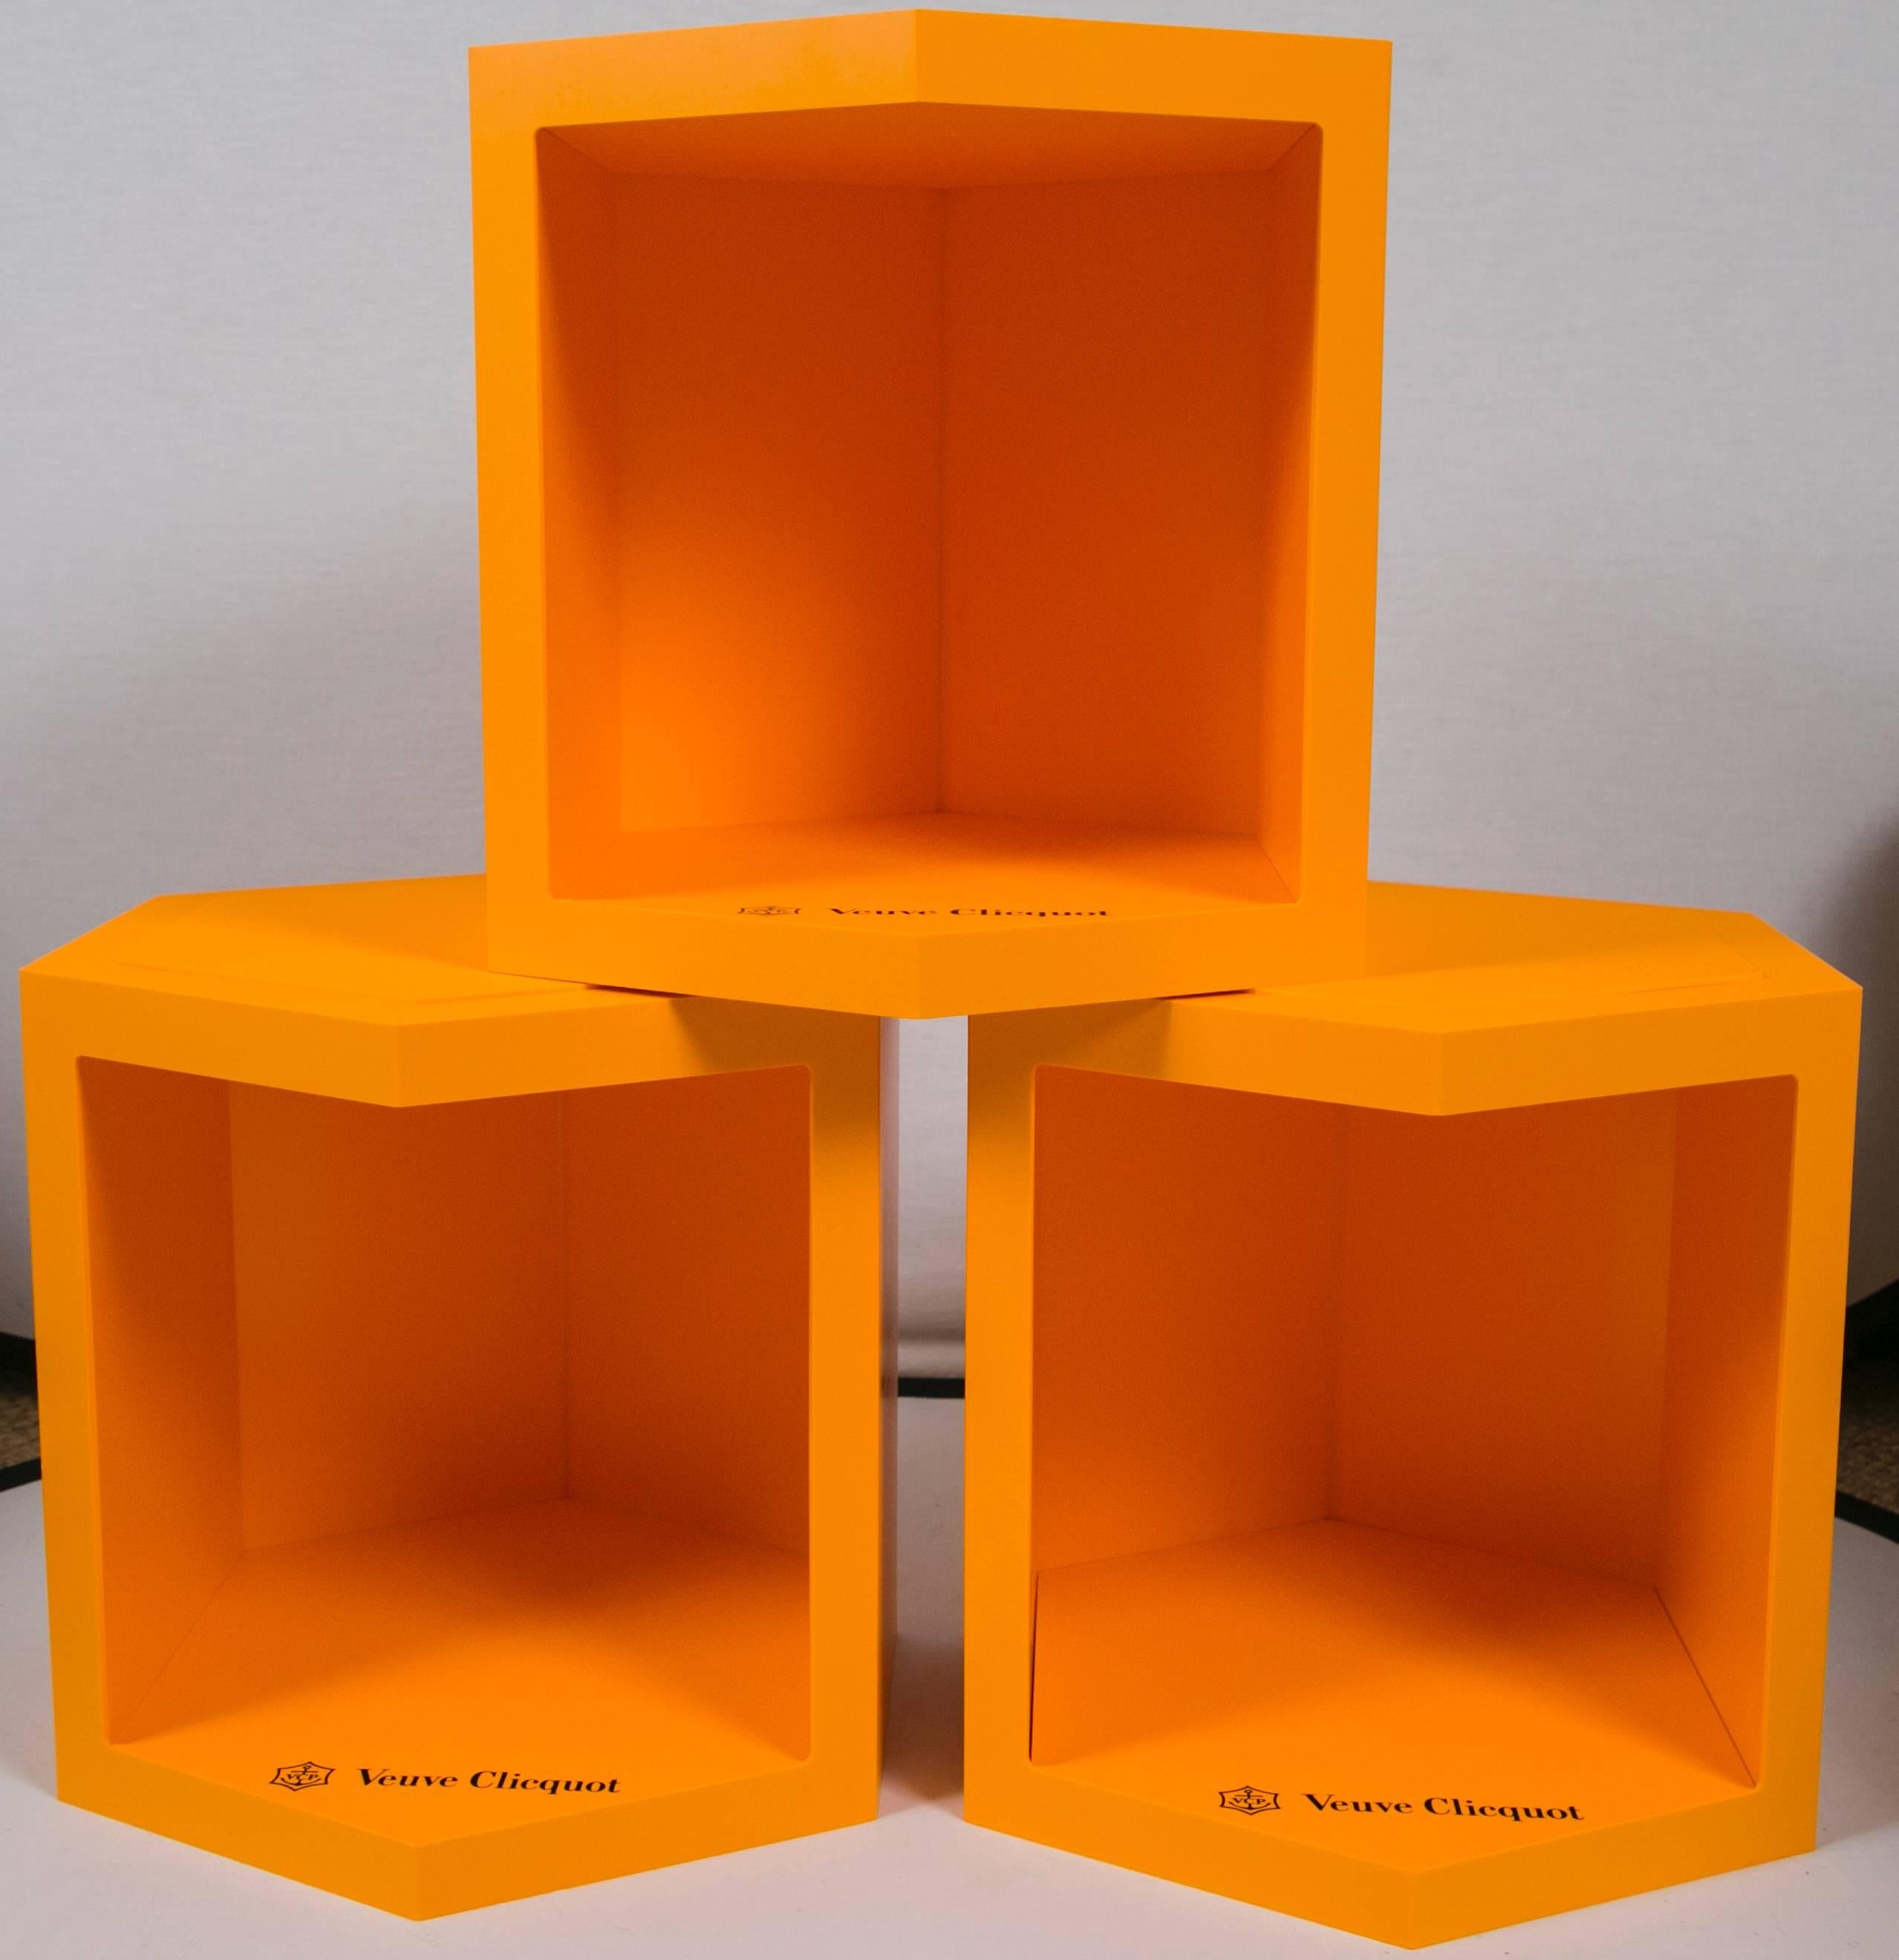 This brand new Veuve Clicquot promotional display box is the perfect playful addition to any home. This piece is a color burst that cannot be resisted (champagne not included, our apologies).

Sold individually at $150 each, making the perfect